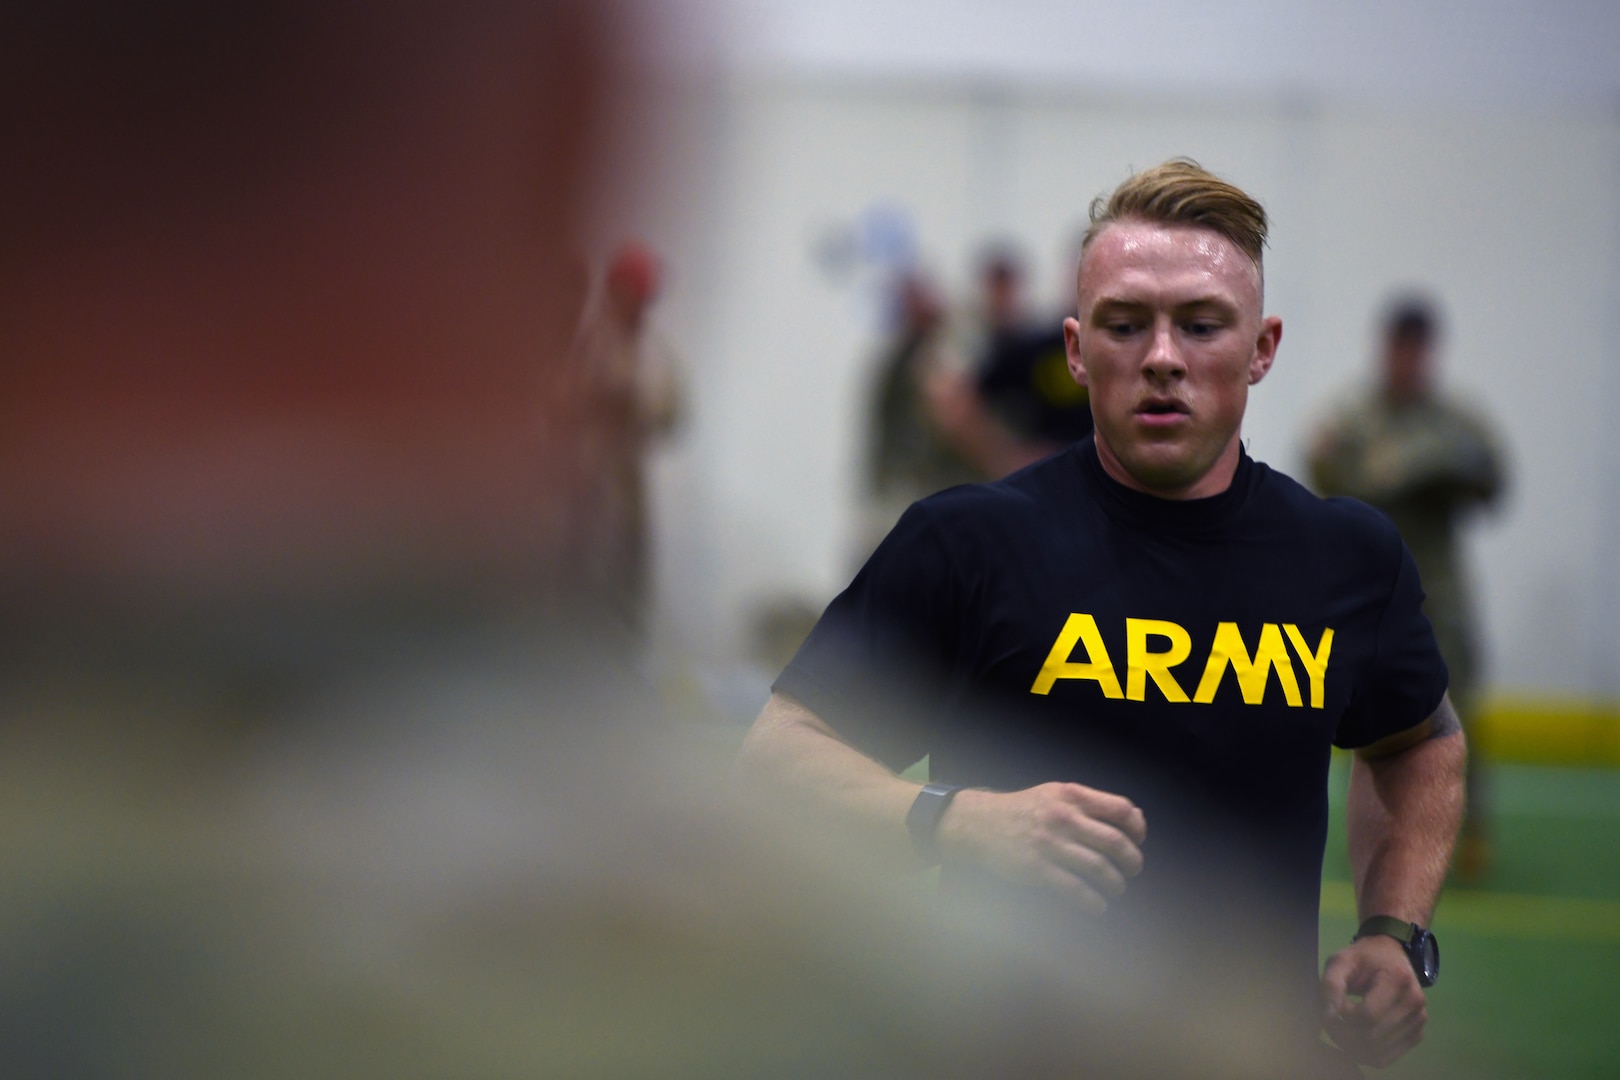 Spc. Austin Manville, an infantryman with the New York Army National Guard’s C Troop, 1st Squadron, 10th Cavalry Regiment, participates in a combat fitness test at the Middle Tennessee State University Recreation Center in Murfreesboro, Tennessee, during the 2022 Army National Guard Best Warrior Competition July 25, 2022. The Army National Guard’s Soldier and Noncommissioned Officer of the Year go on to represent the Army Guard in the Department of the Army Best Warrior Competition later this year.